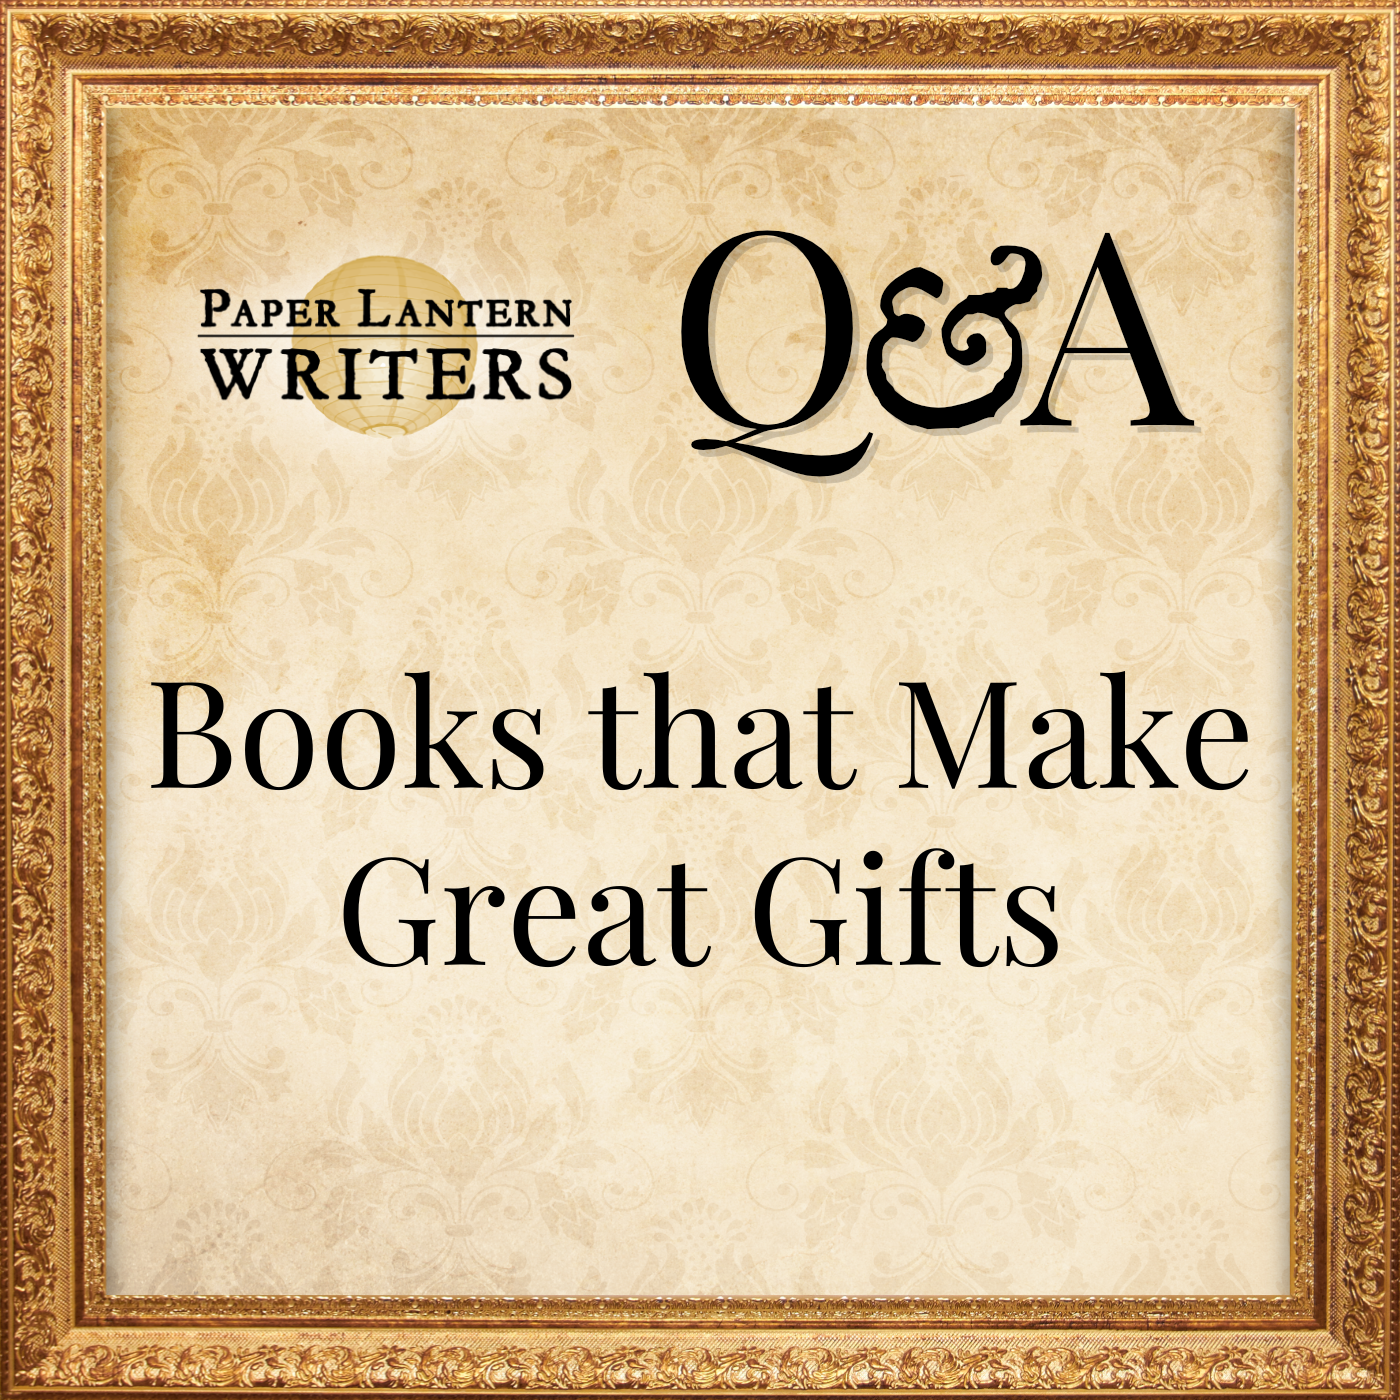 Q&A – Books that Make Great Gifts